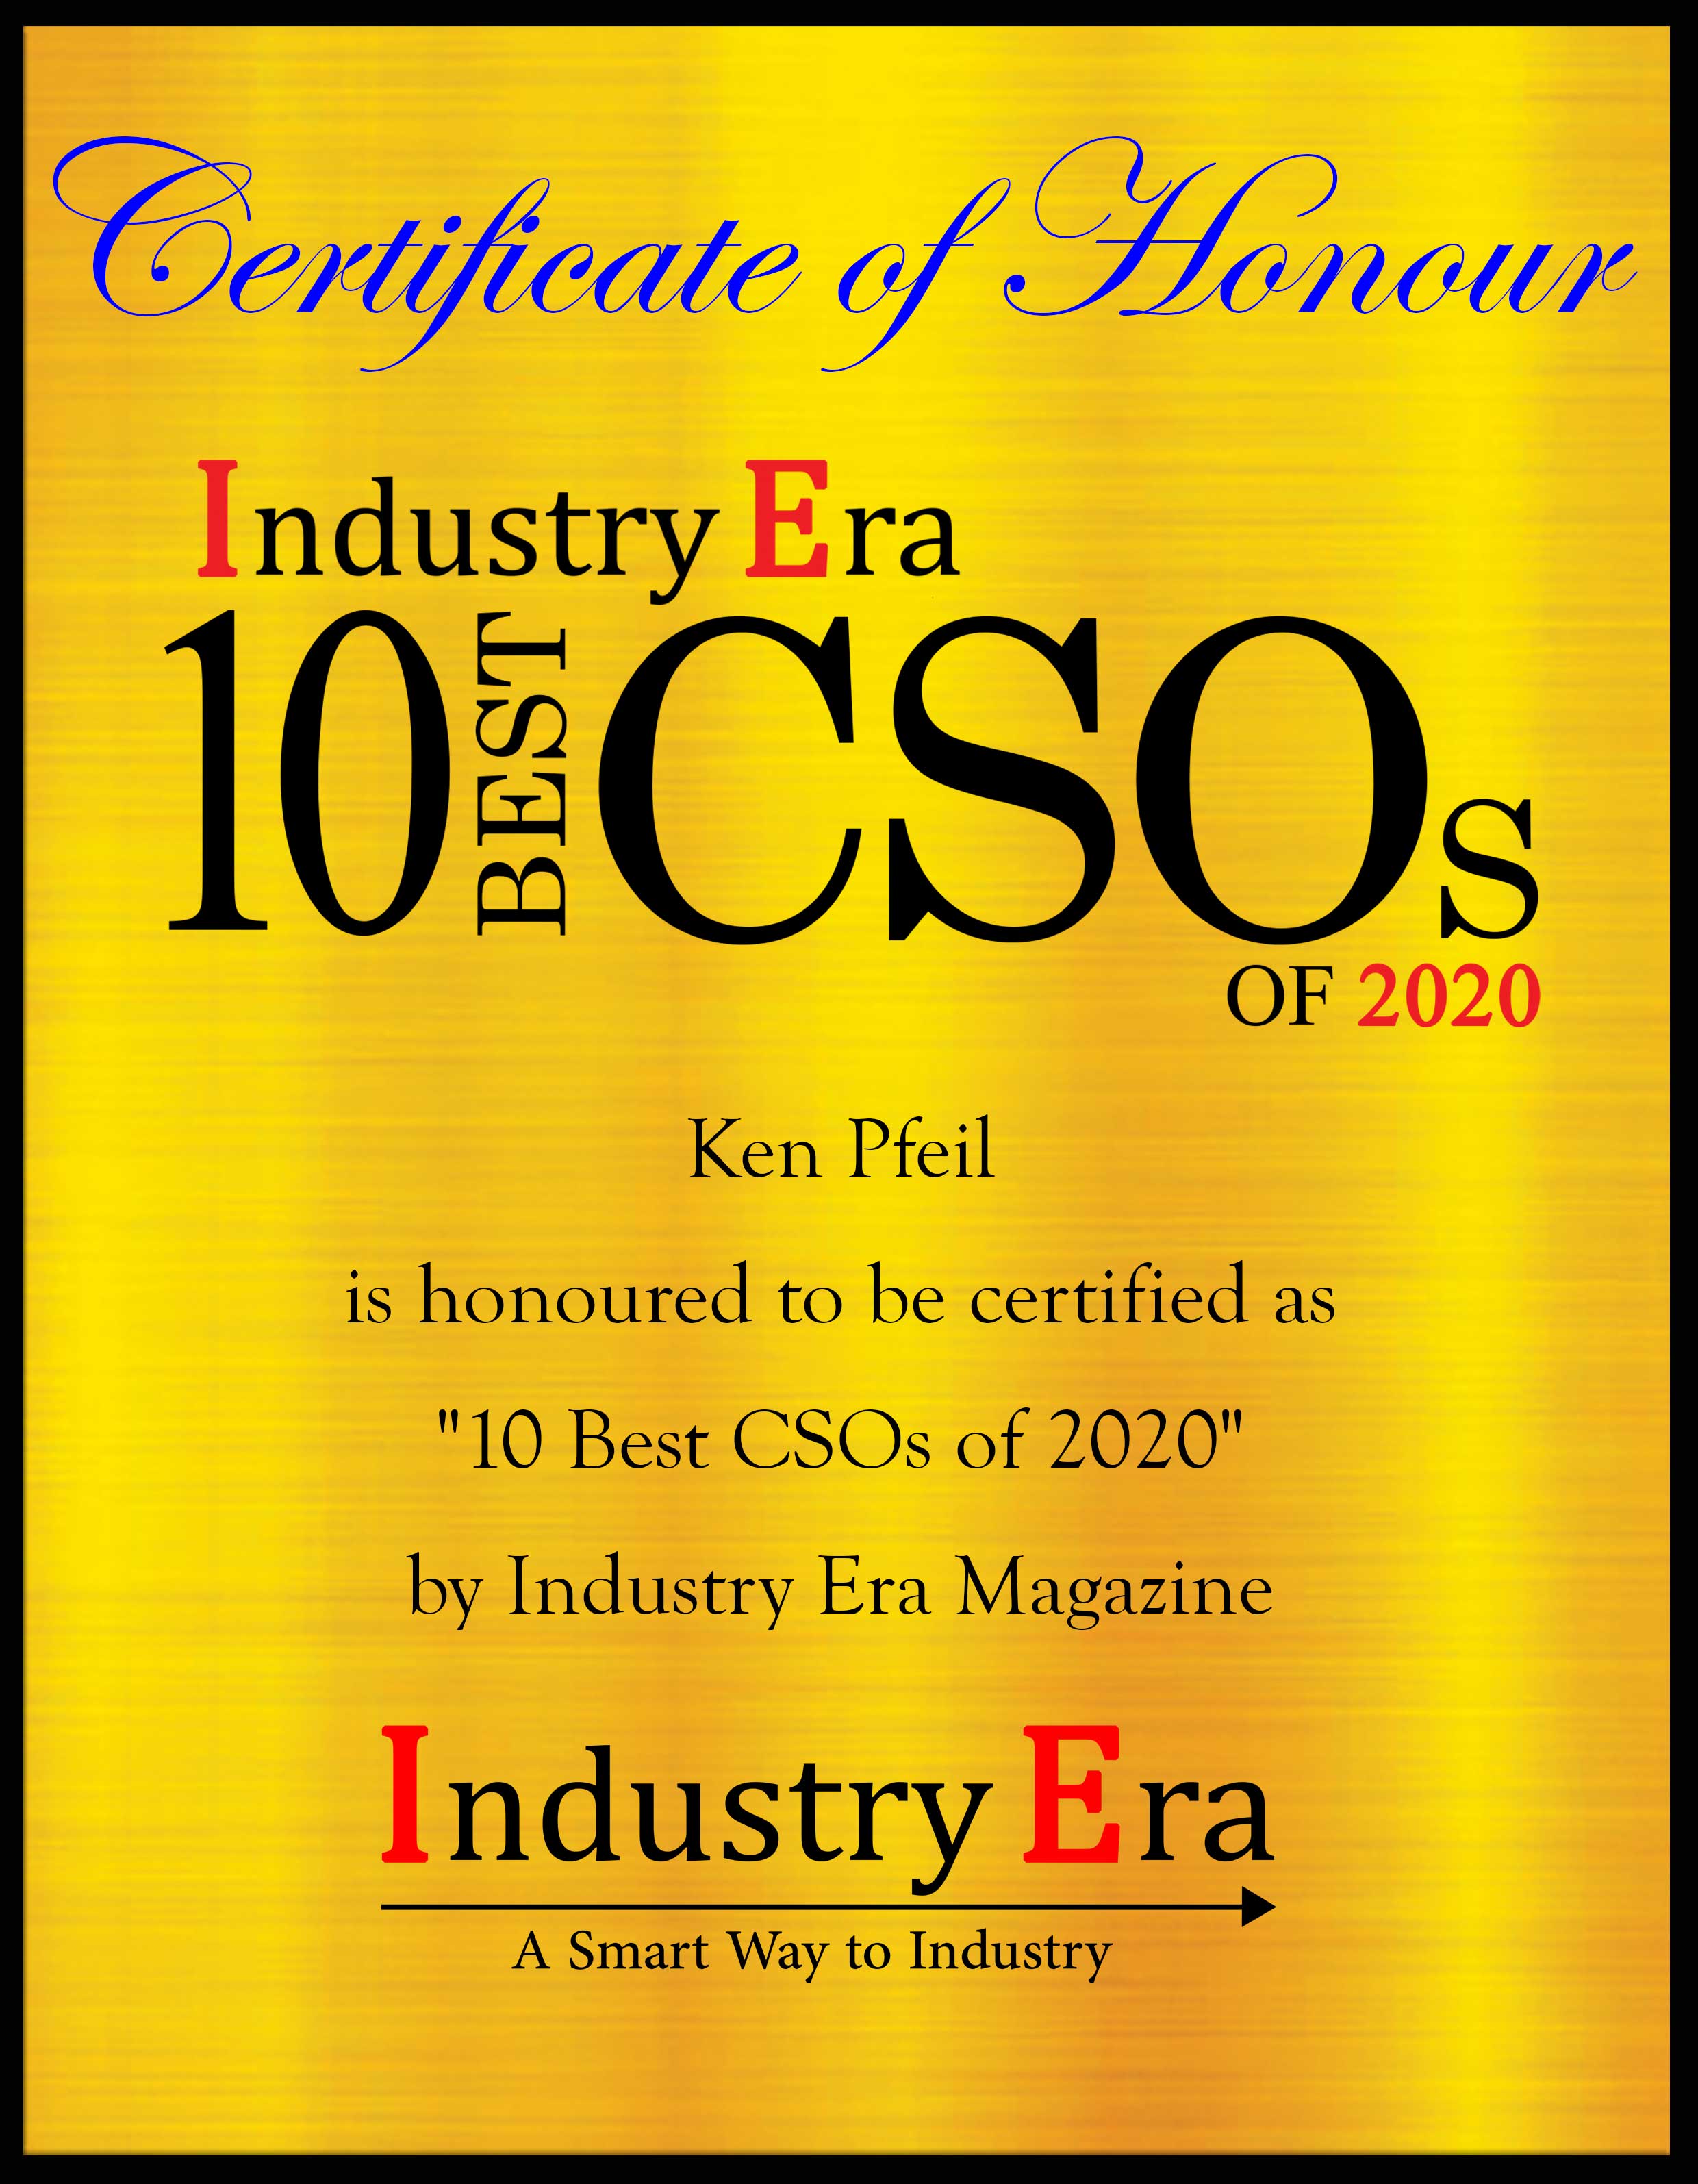 Ken Pfeil, Chief Security Architect and CSO for TechDemocracy, Certificate